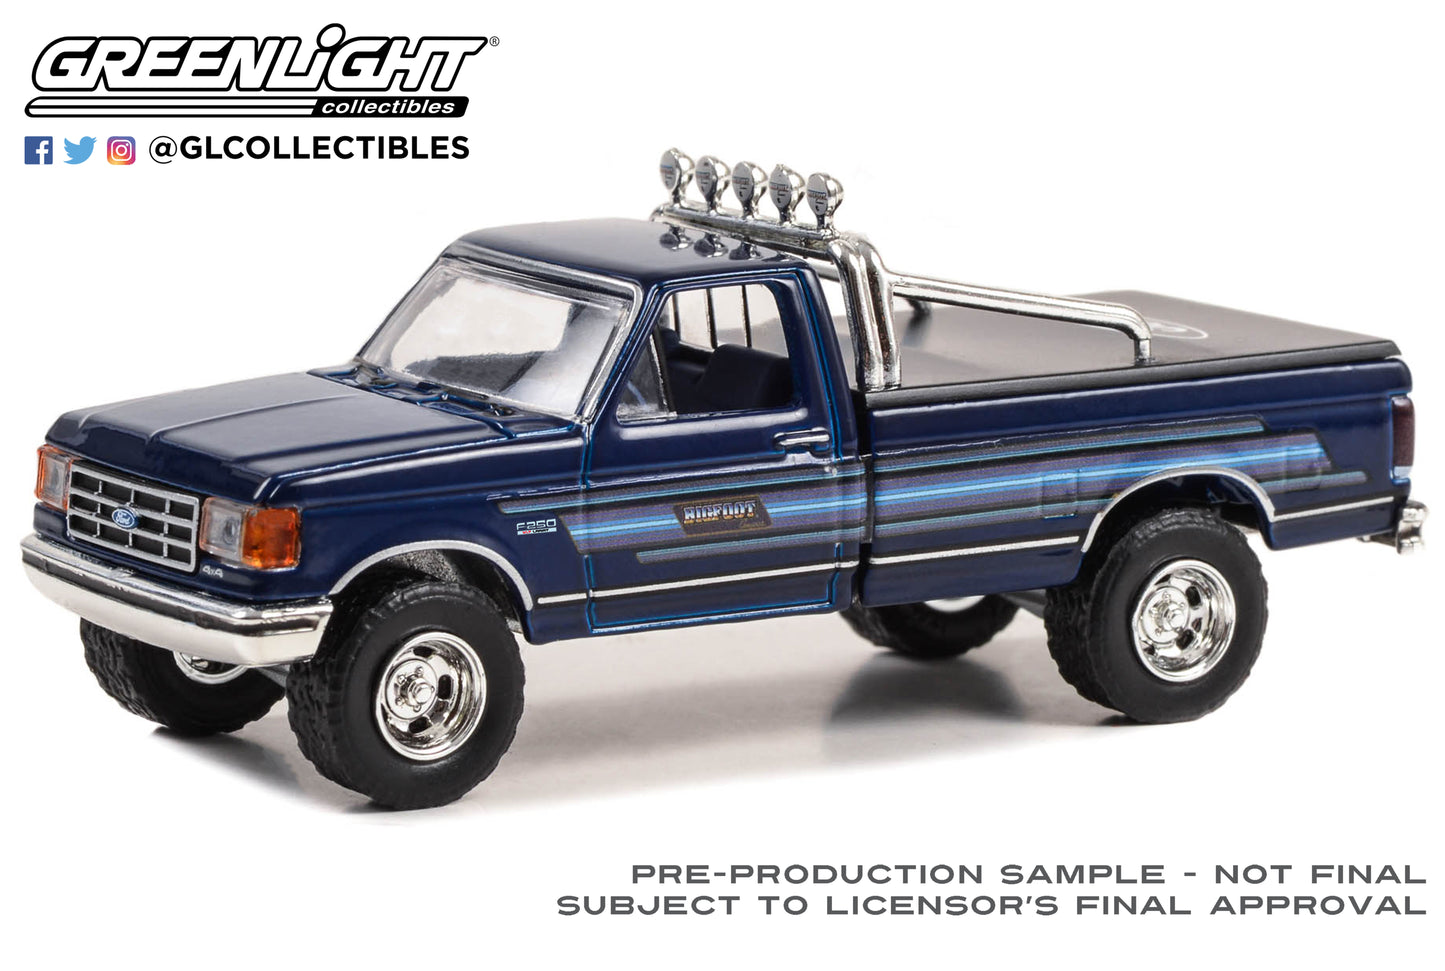 GreenLight 1:64 1987 Ford F-250 XLT Lariat - Bigfoot Cruiser #1 - Ford, Scherer Truck Equipment and Bigfoot 4x4 Collaboration (Only 300 Produced) 30433